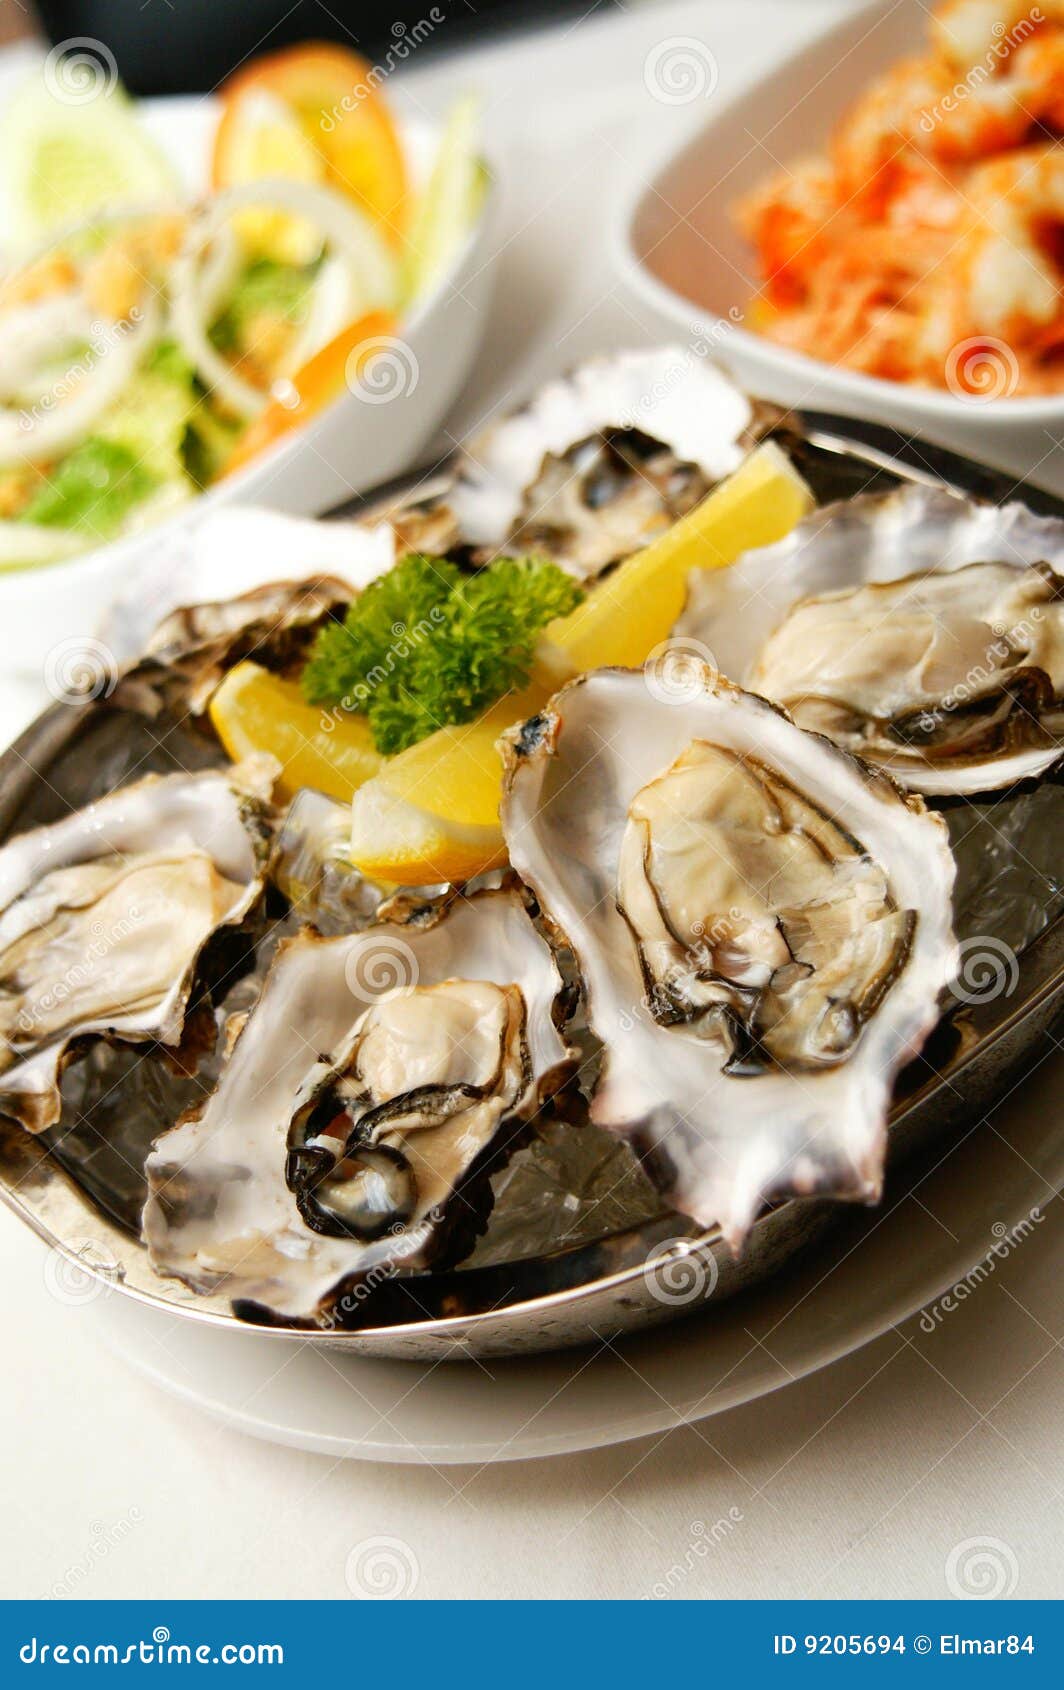 fresh oyster as appetizer